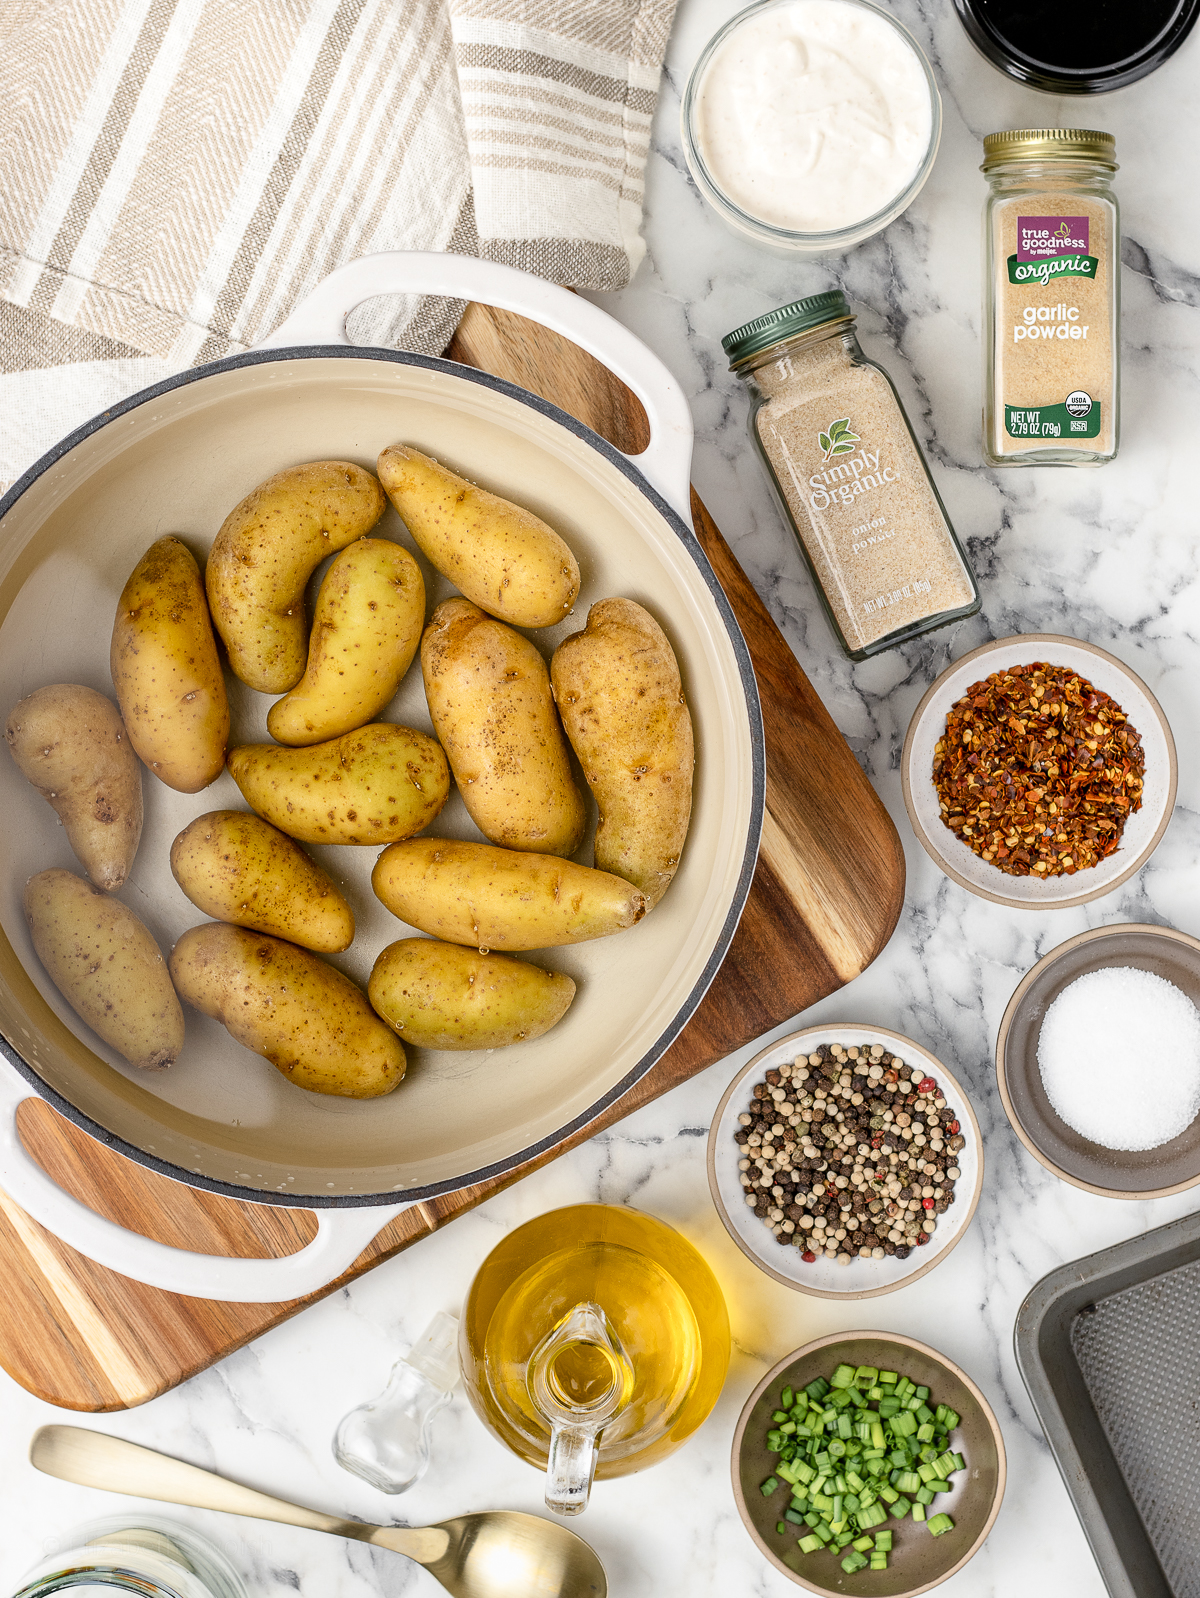 Ingredients. Fingerling potatoes in a salted water pot with olive oil, salt, pepper, garlic powder, onion powder, red pepper flakes, and creamy dipping sauce.